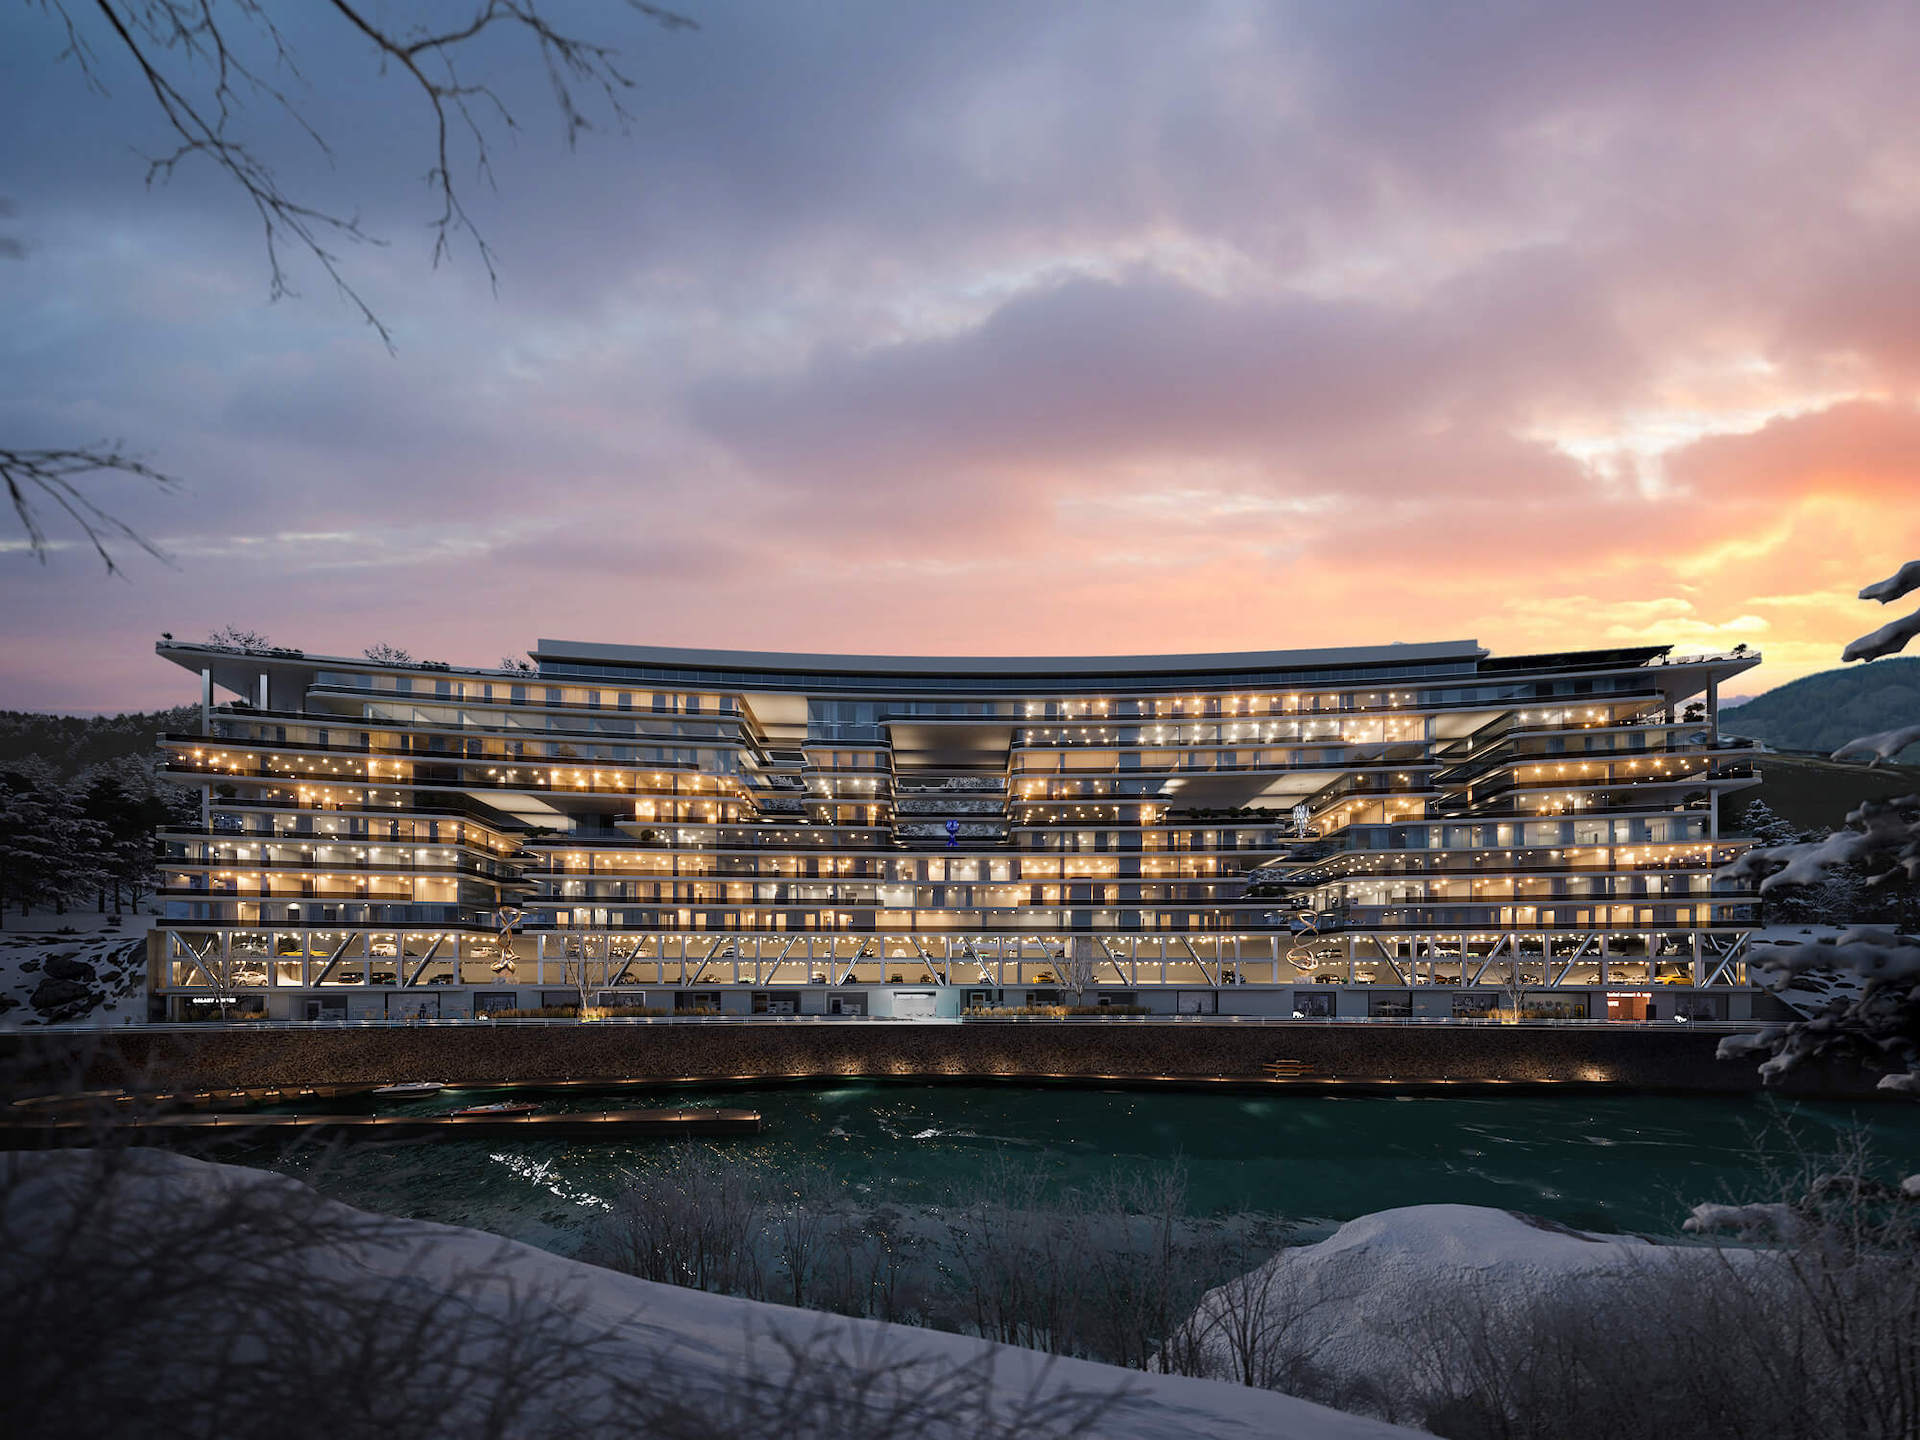 A Waterfront Hotel Visualized in 3D by ArchiCGI Company